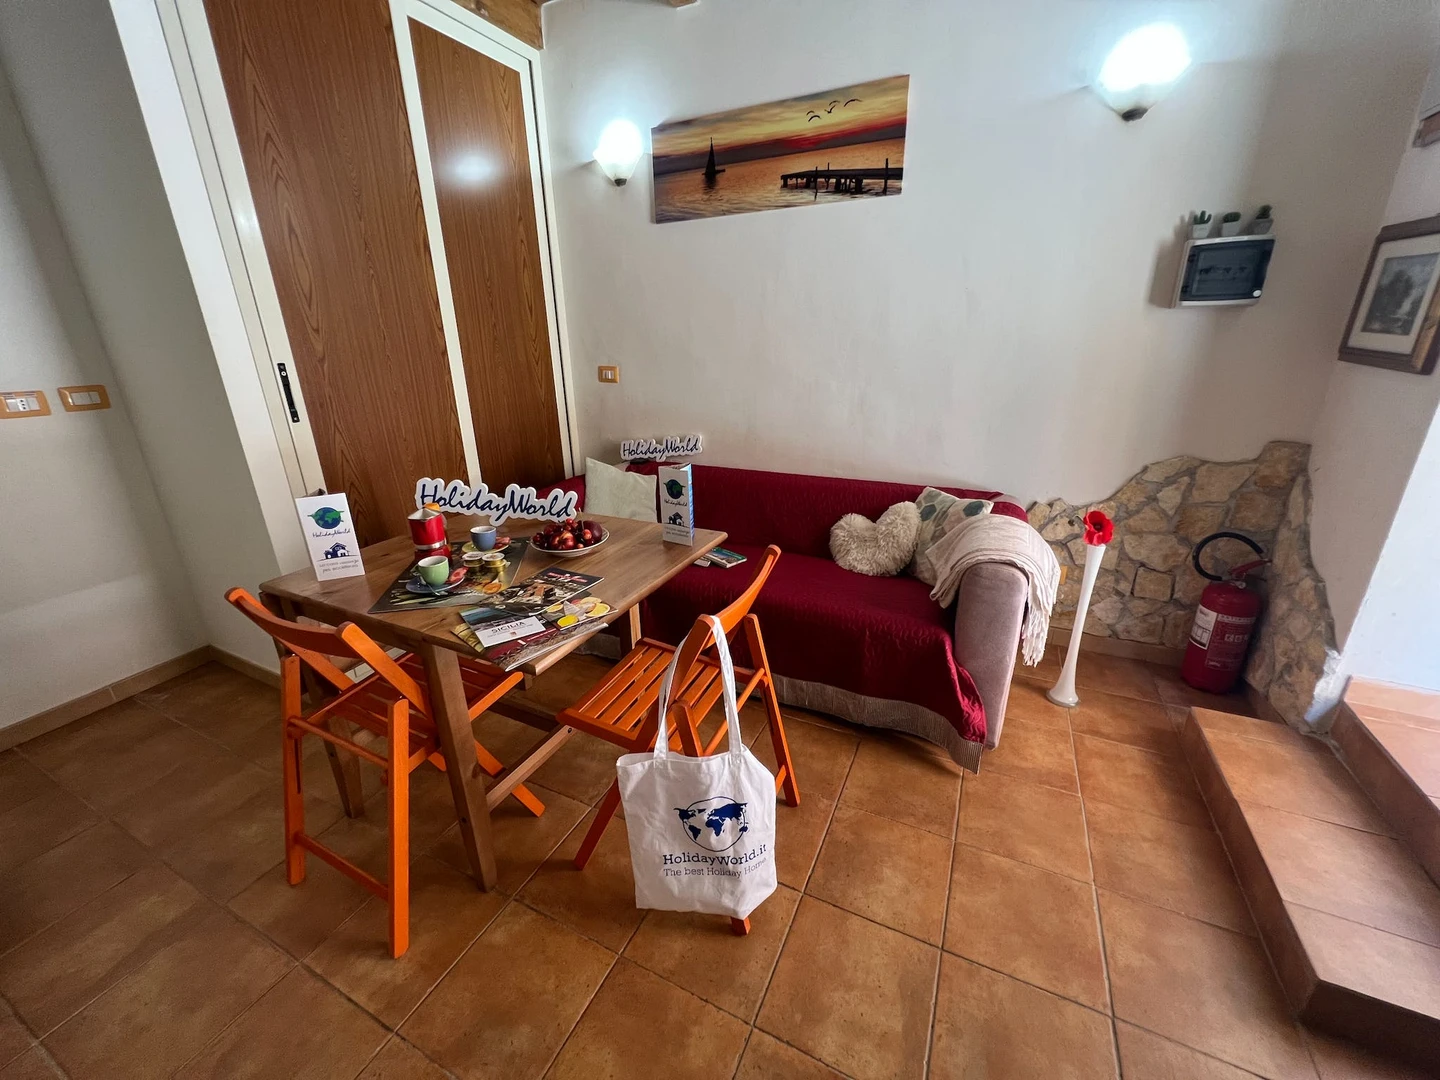 Accommodation in the centre of Messina